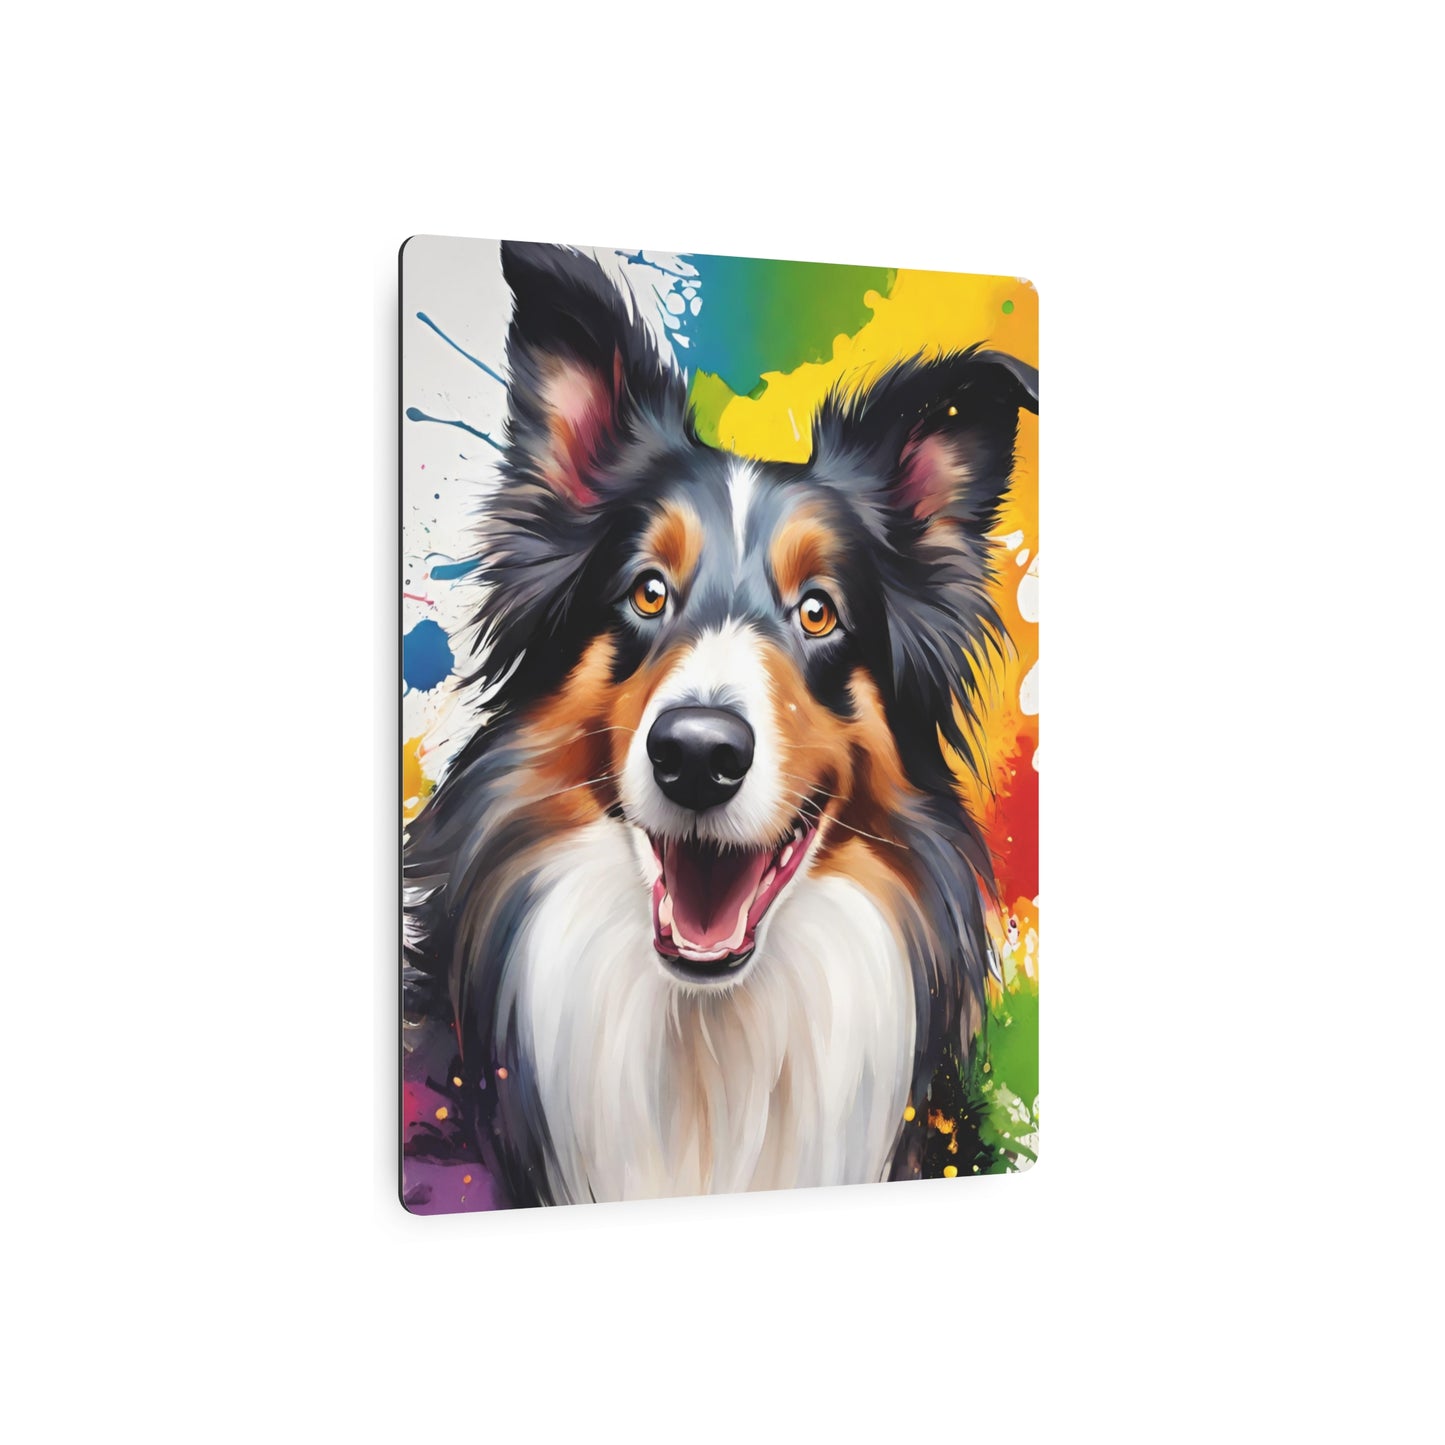 Metal Wall Art Decor featuring a Colorful Collie Dog. Mounting tools included. Versatile Home Decor.